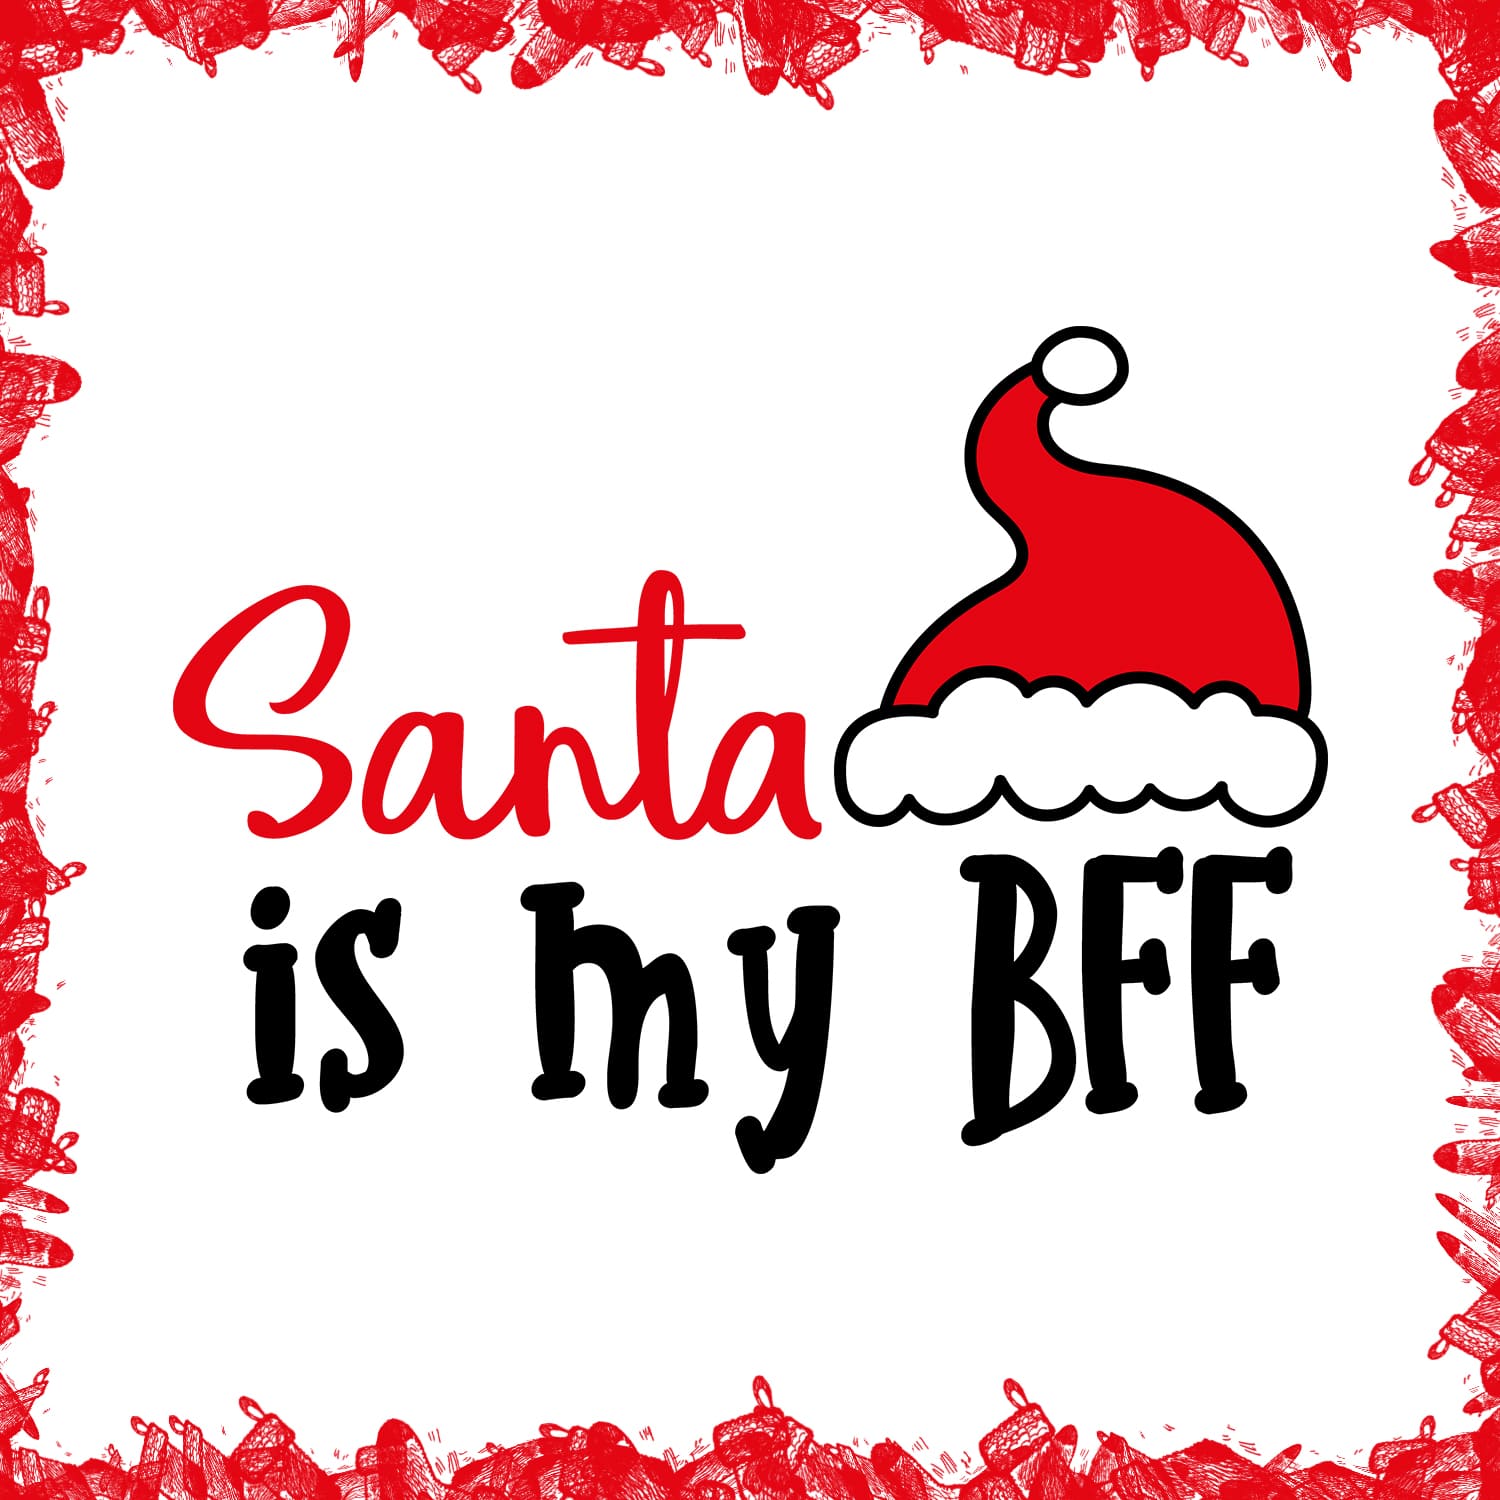 Quote santa is my bff main cover.